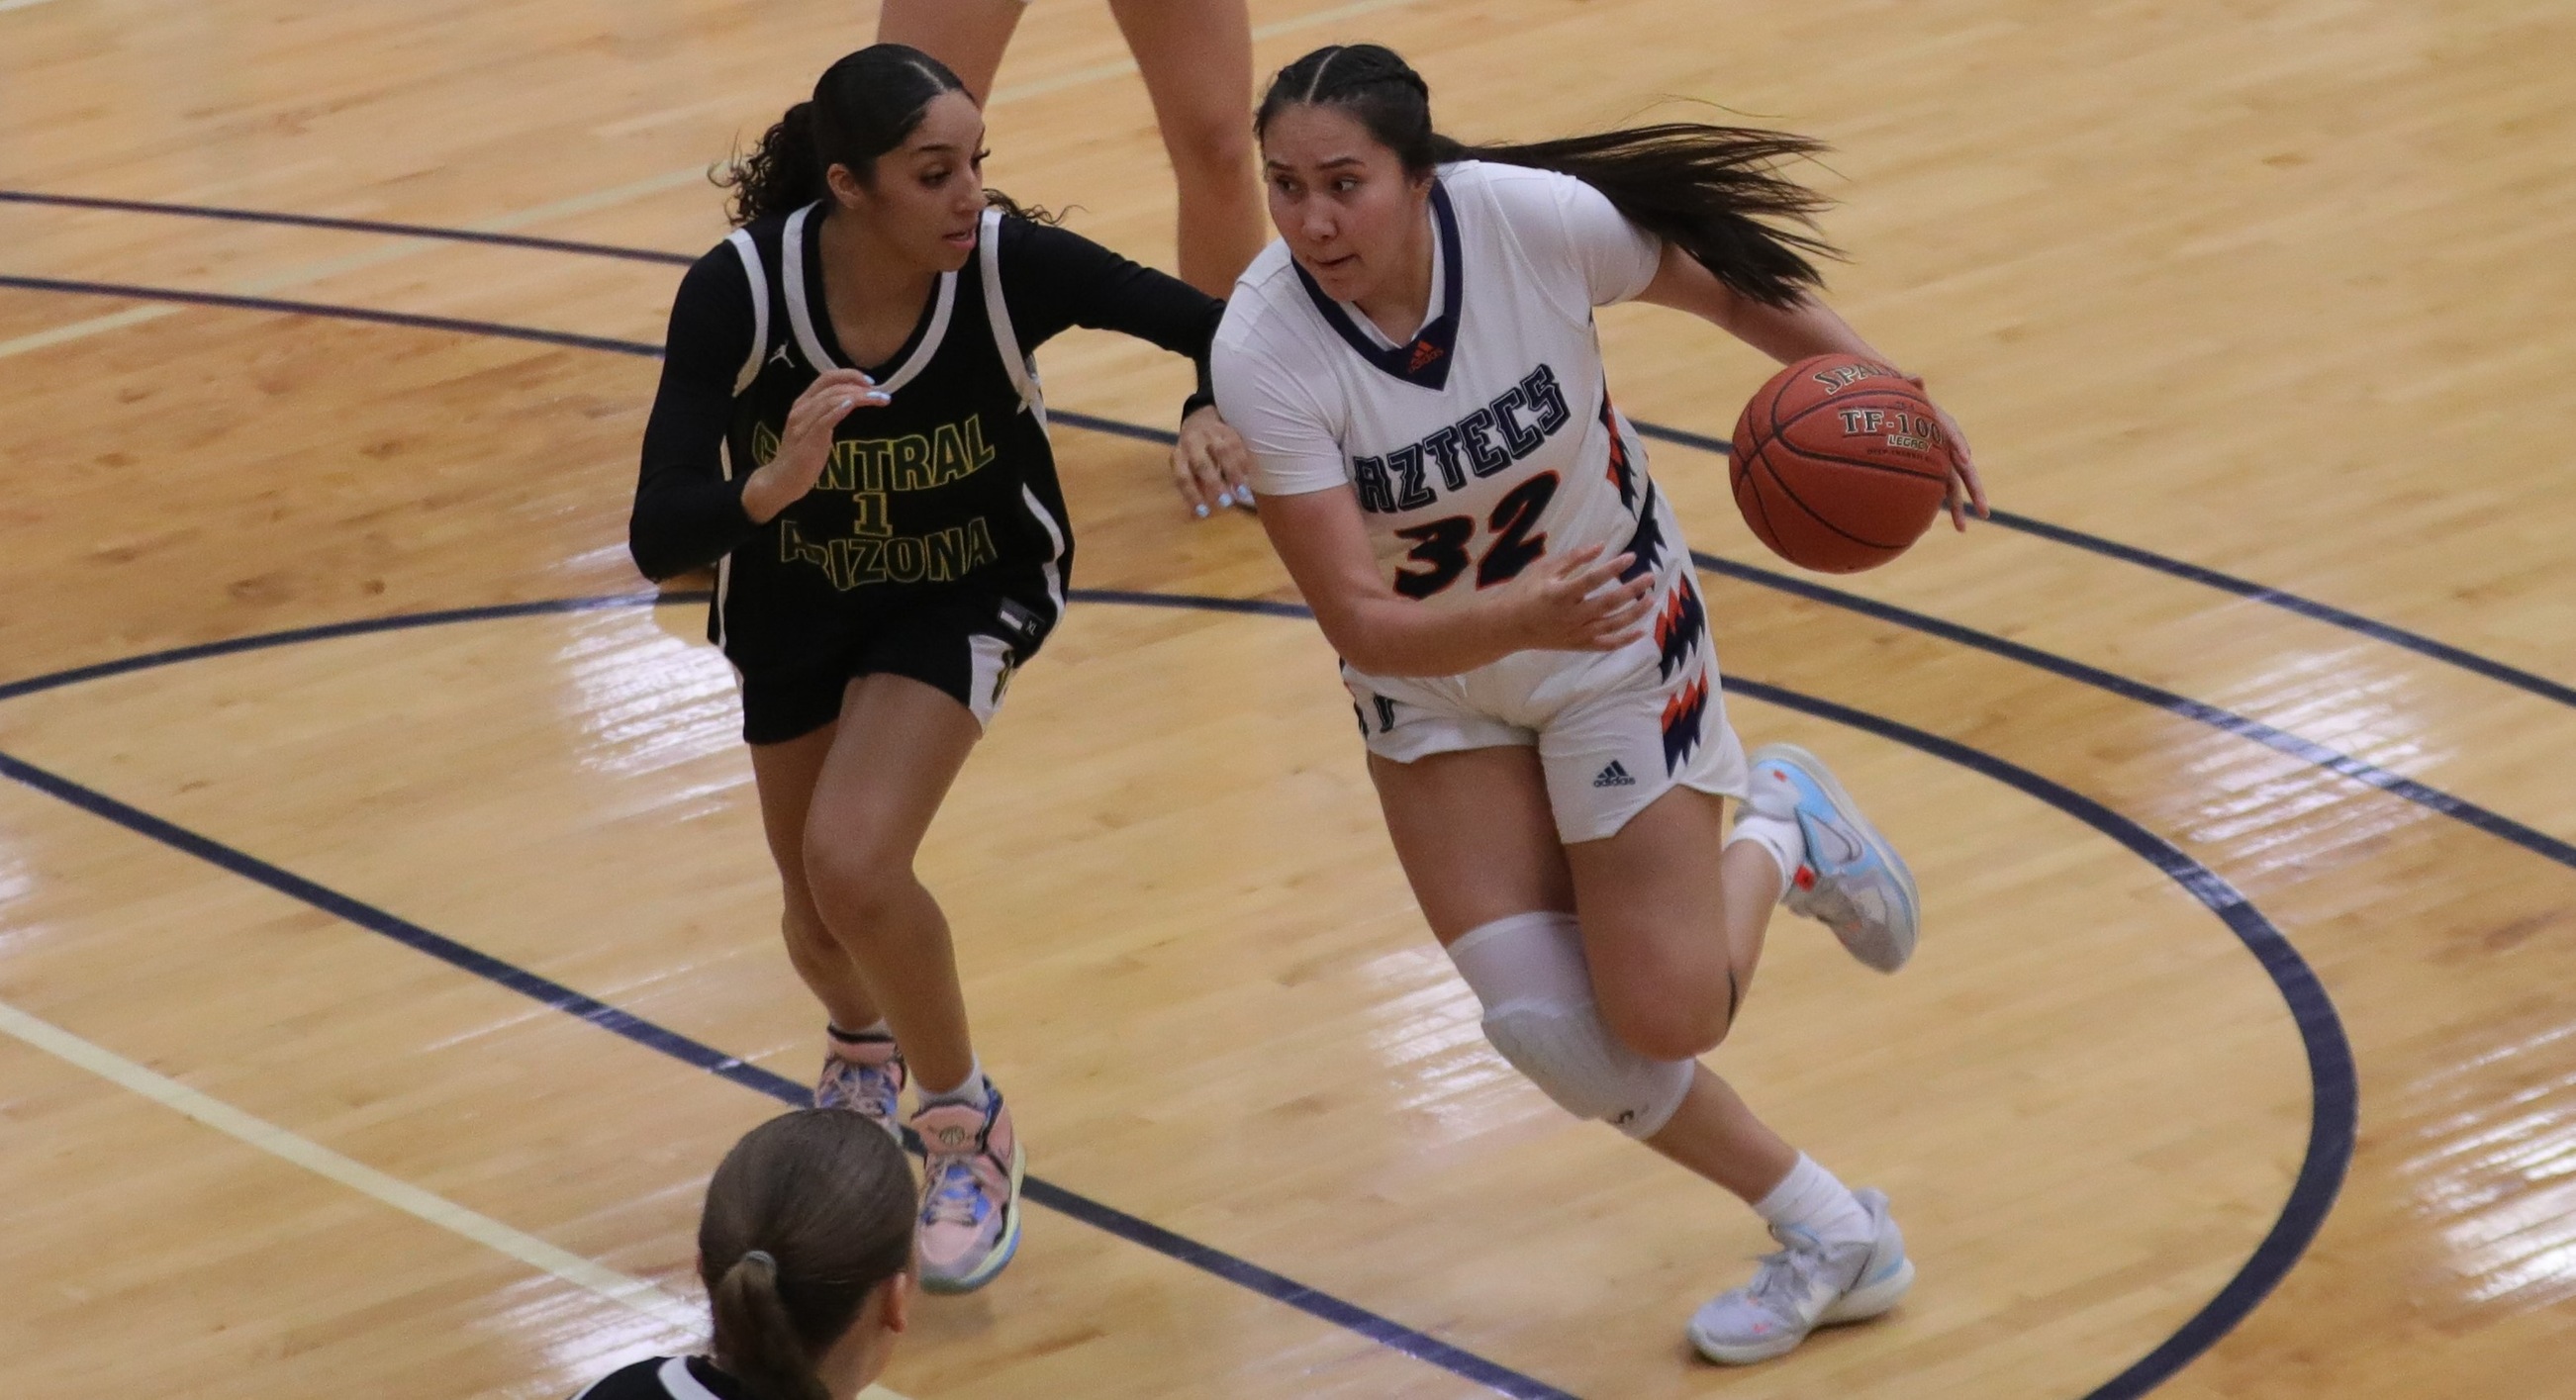 Sophomore Torrance Begay (Page HS) finished with a team-high 13 points but the No. 10 ranked Aztecs (Division II) fell to No. 14 Eastern Arizona College (Division I) 59-43 in Thatcher. The Aztecs finished the regular season at 23-7 overall and 16-6 in ACCAC conference play. Photo by Steve Escobar